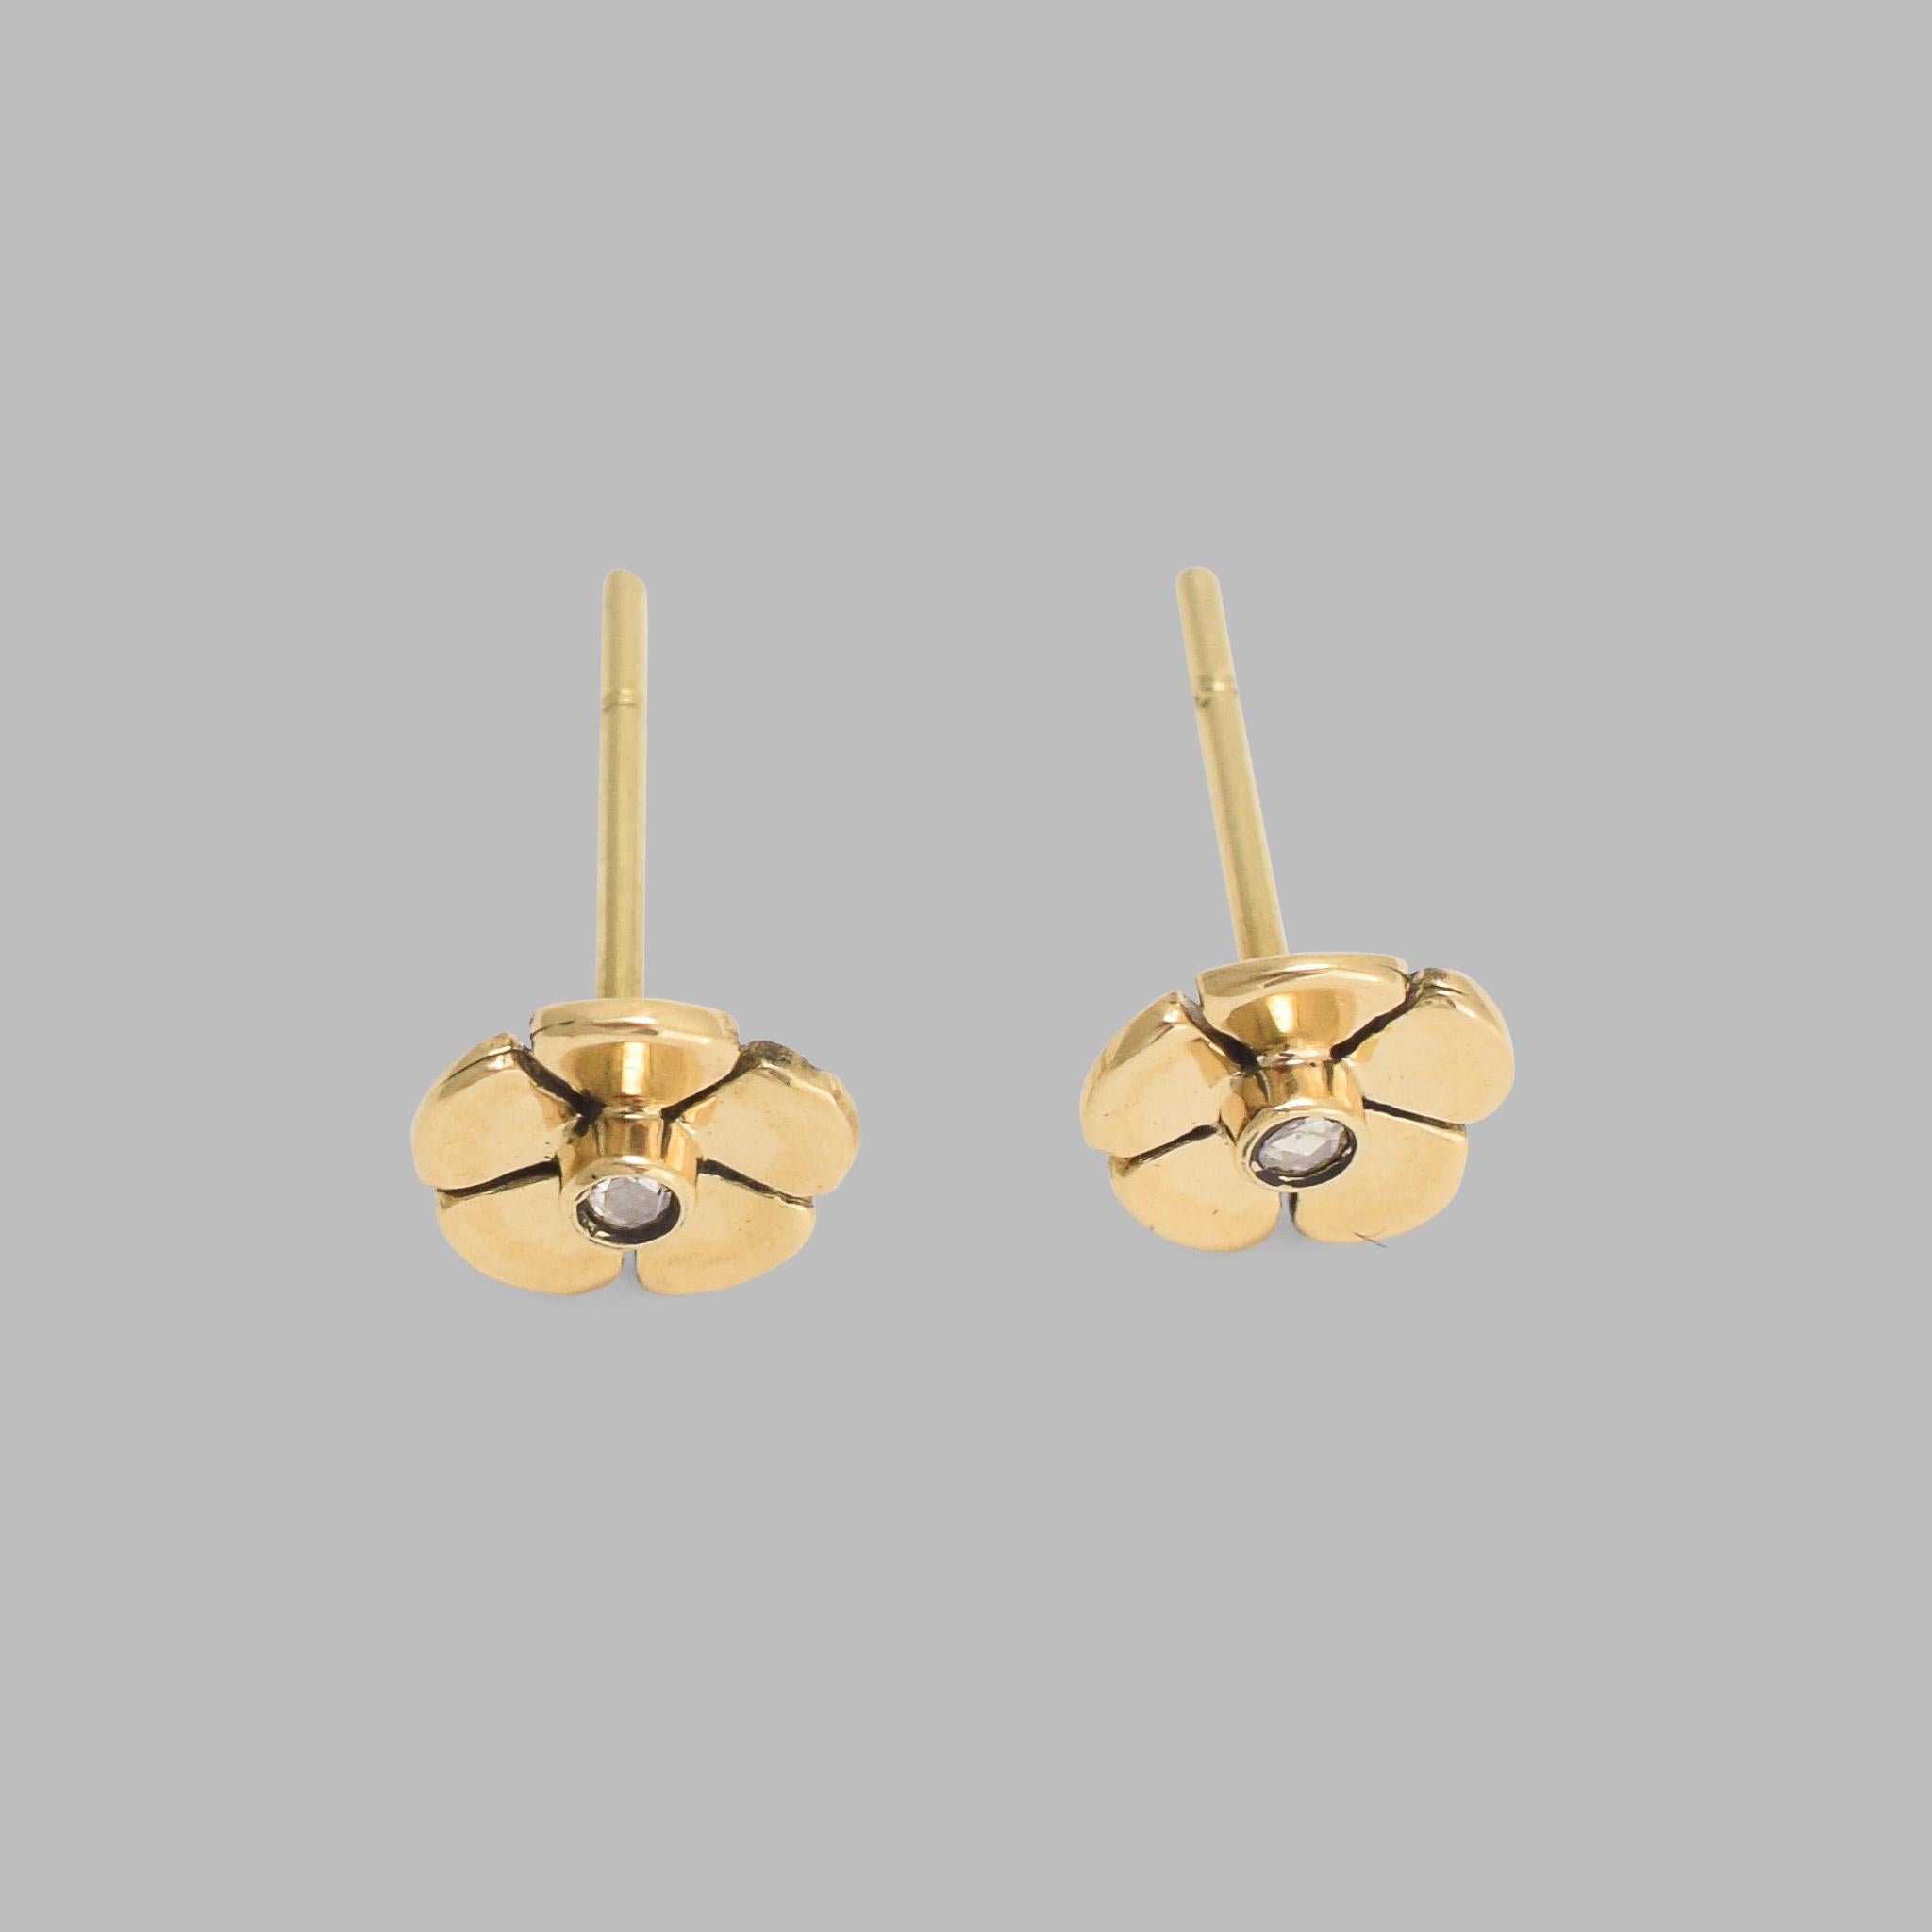 BL Bespoke Collection

A sweet and simple pair of diamond stud earrings. Crafted in 18 karat gold, each stud is modelled as a little buttercup flower. Handmade in England.

Part of our new range in collaboration with master jeweller Gaetano